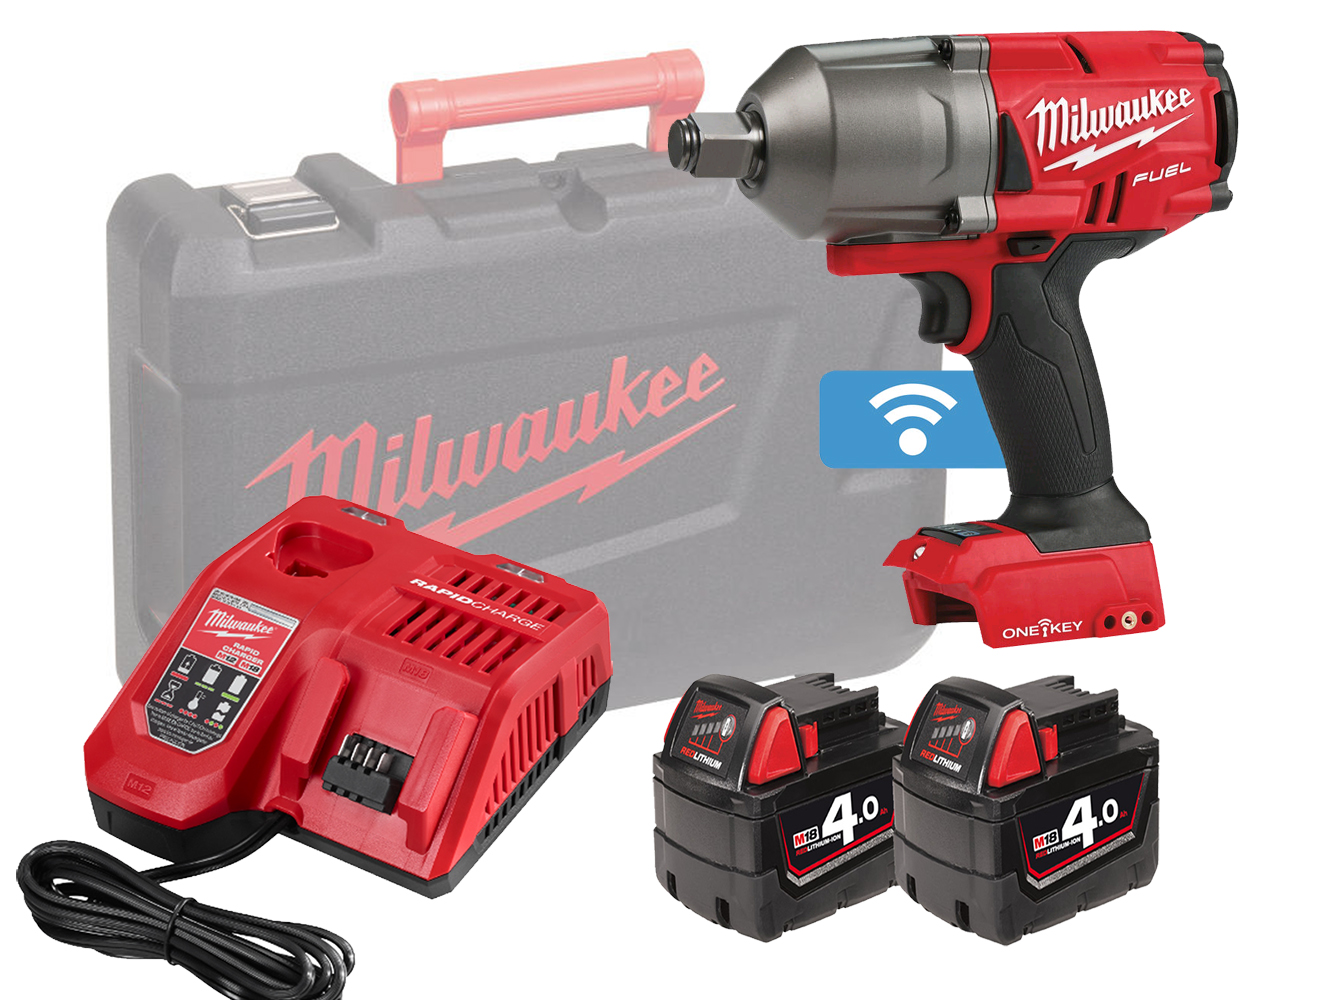 Milwaukee M18ONEFHIWF34 One-Key 18V 3/4in High Torque Wrench - 4.0Ah Pack